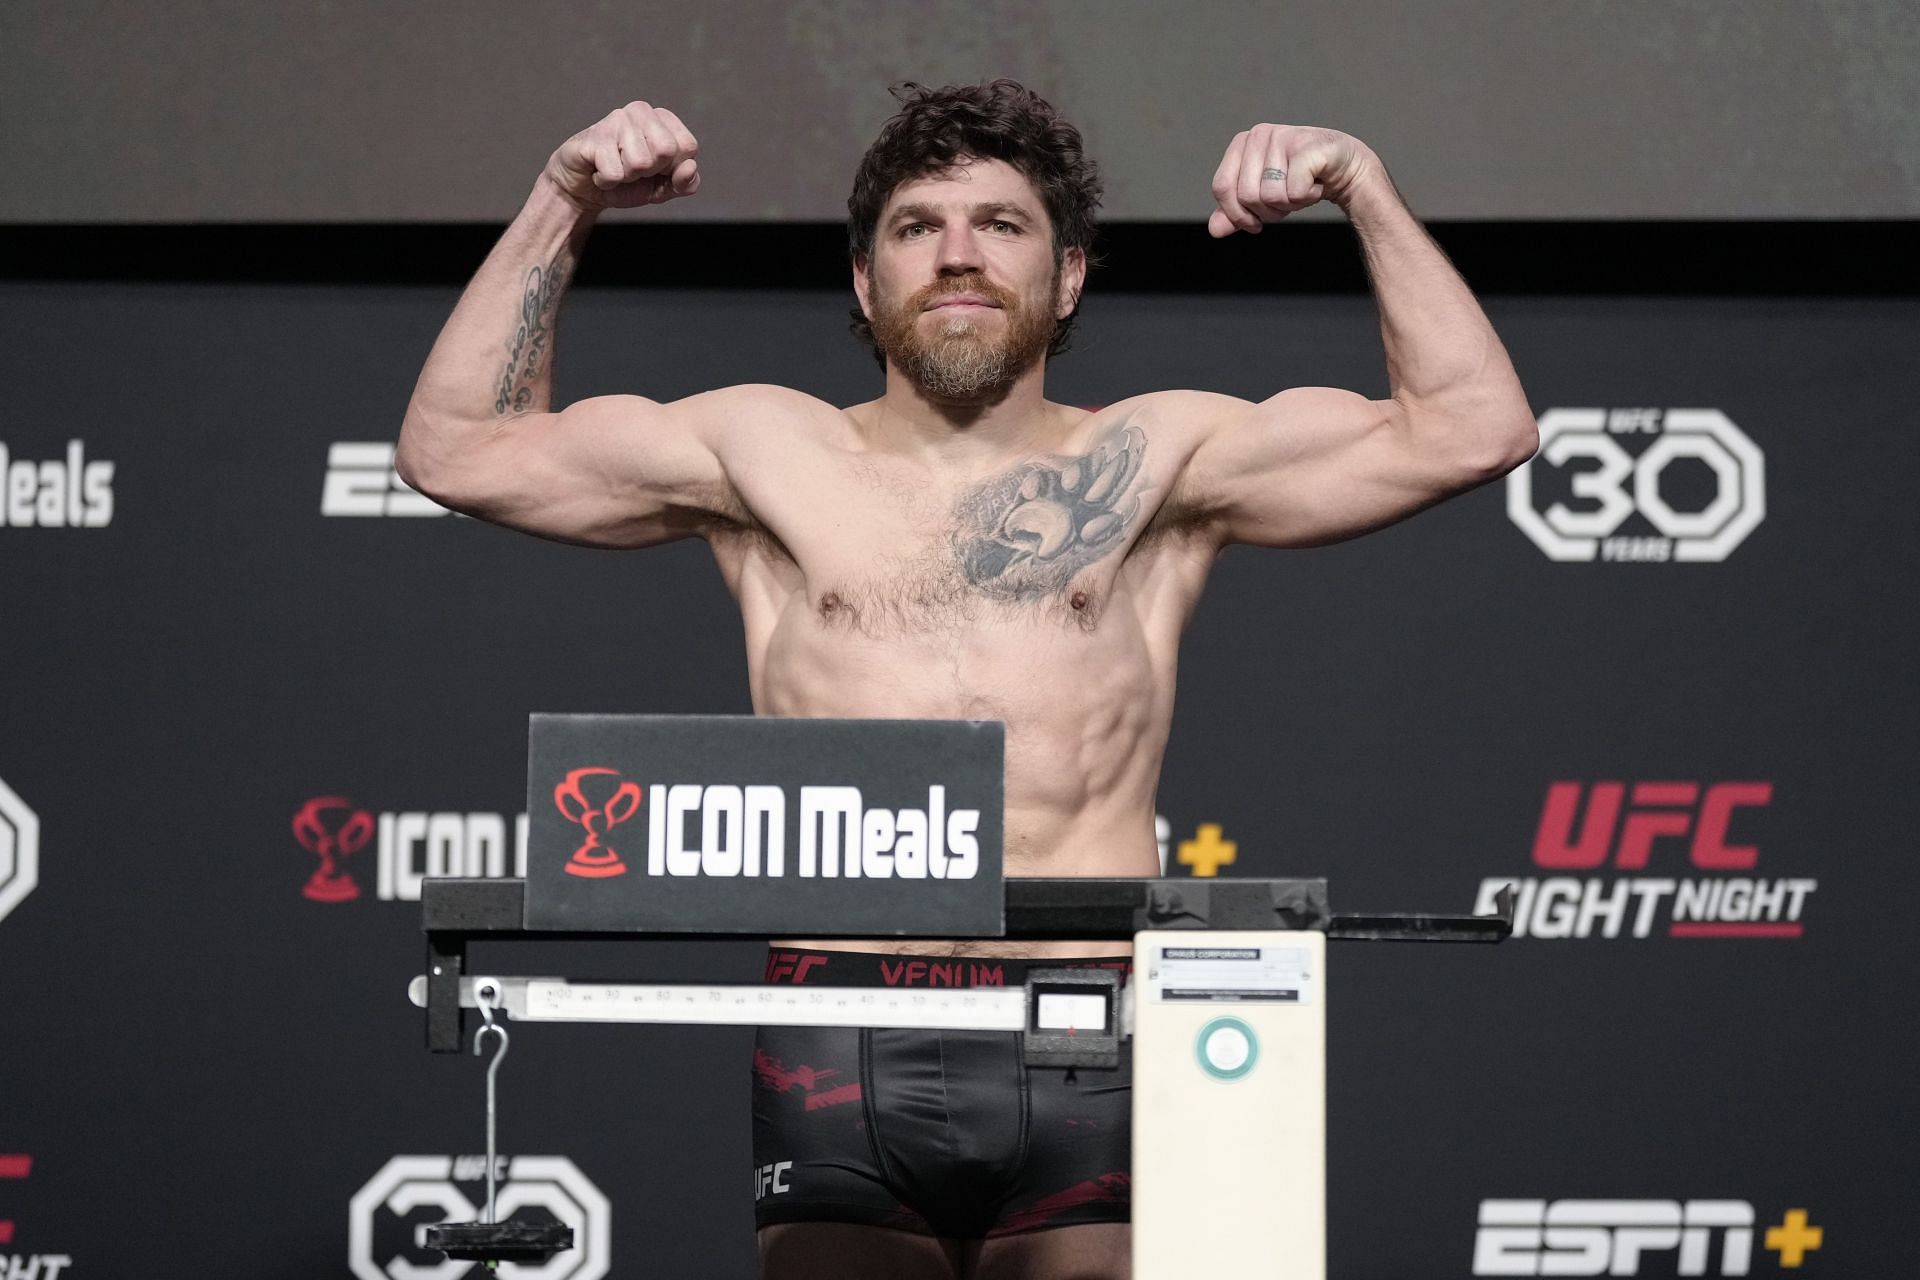 Jim Miller picked up a win in his 43rd octagon bout last night